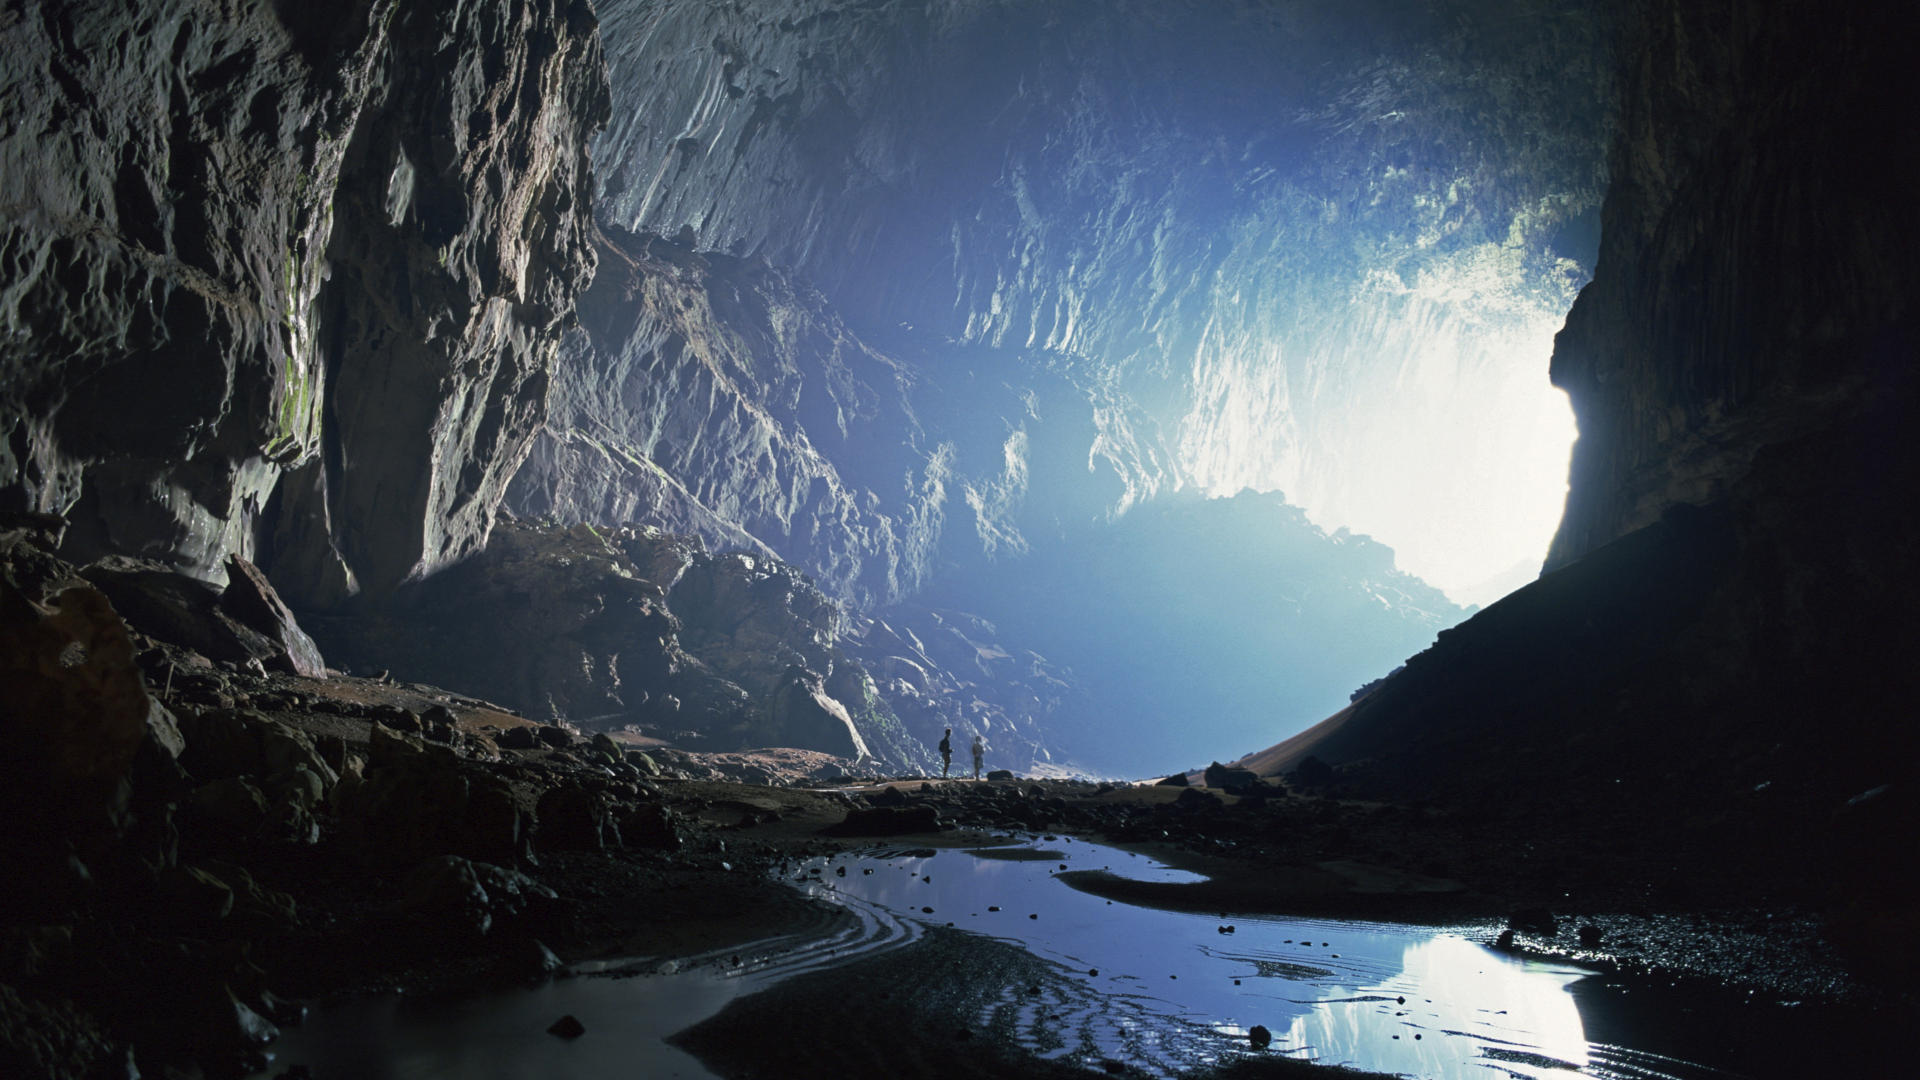 Cave Desktop Wallpapers for HD Widescreen and Mobile 1920x1080